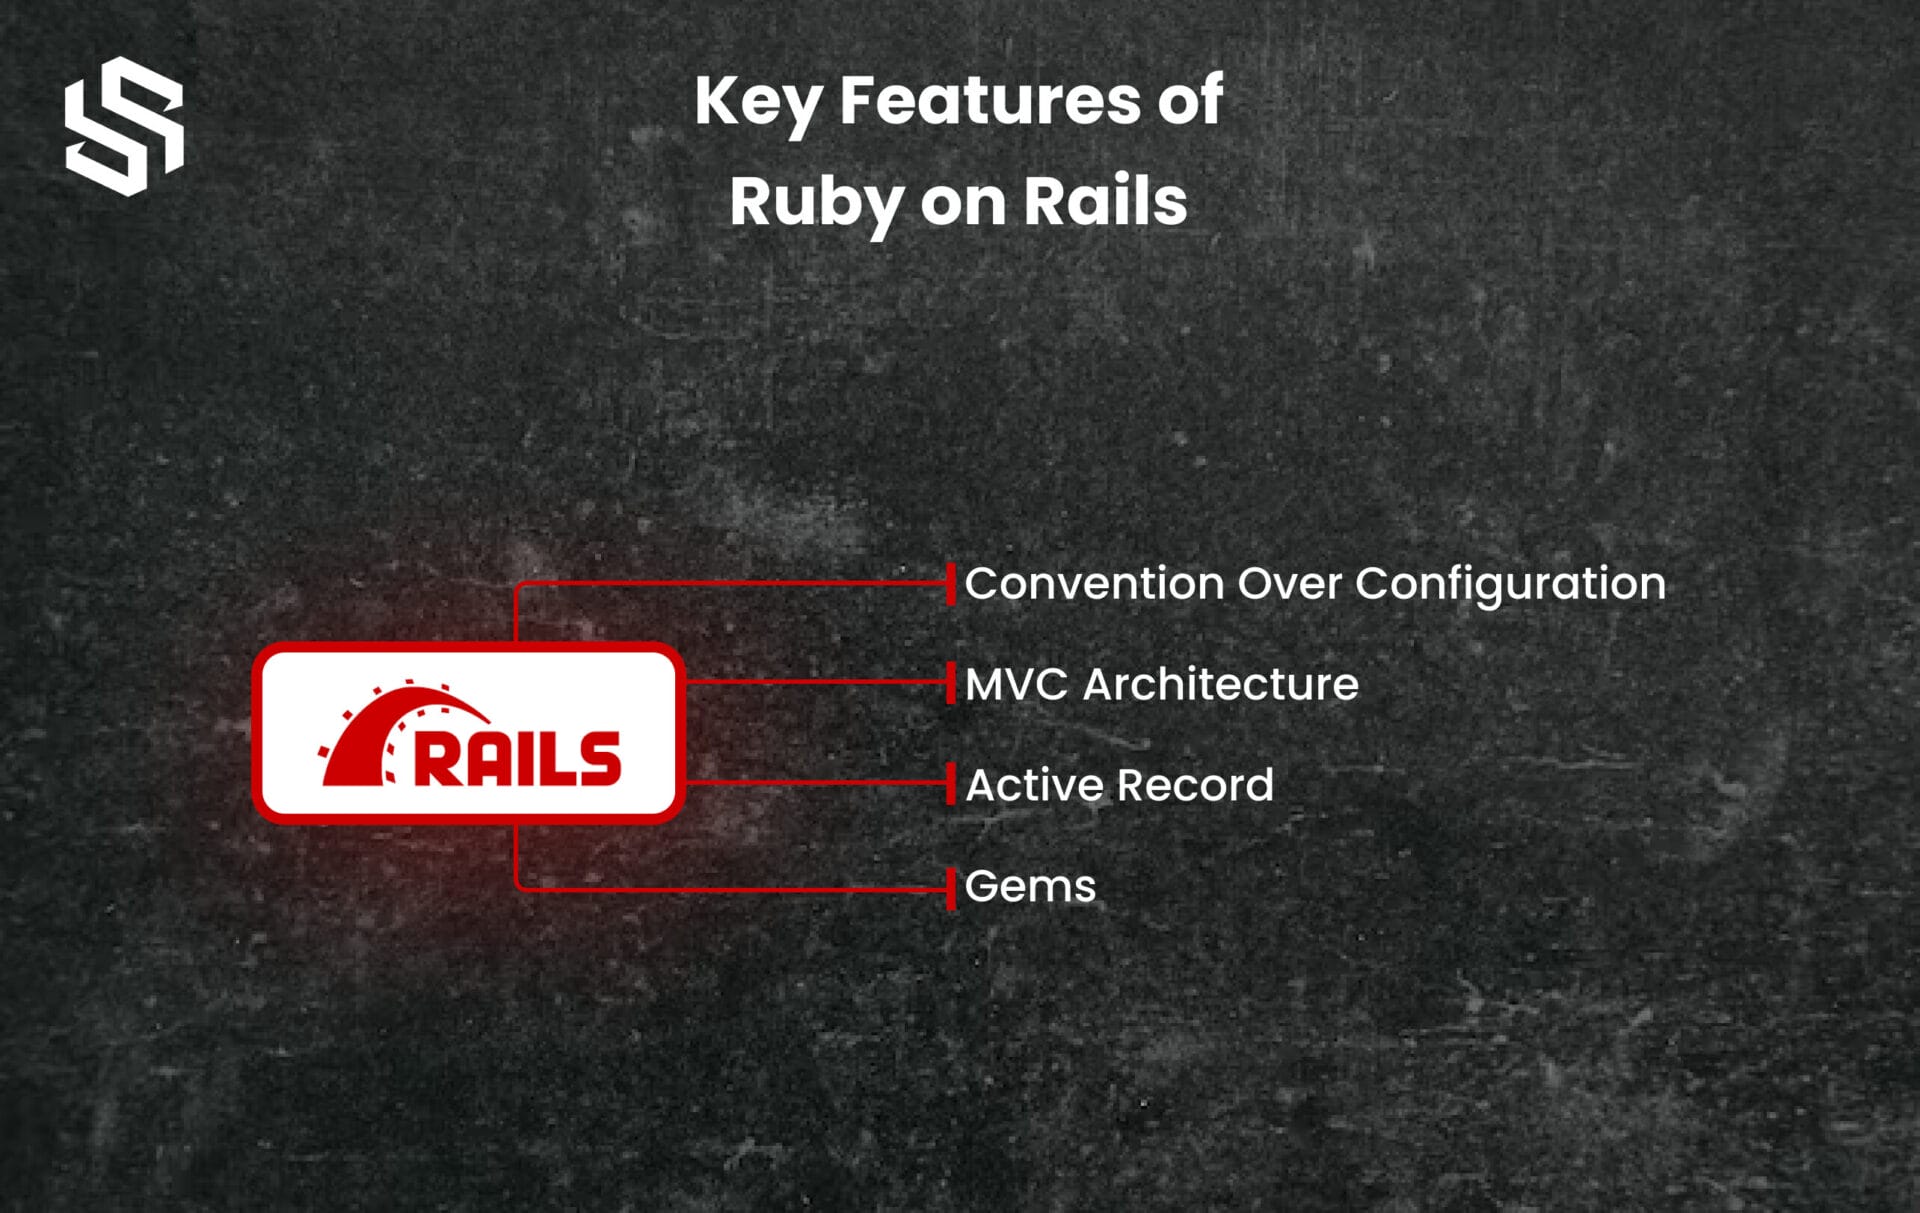 Key Features of Ruby on Rails